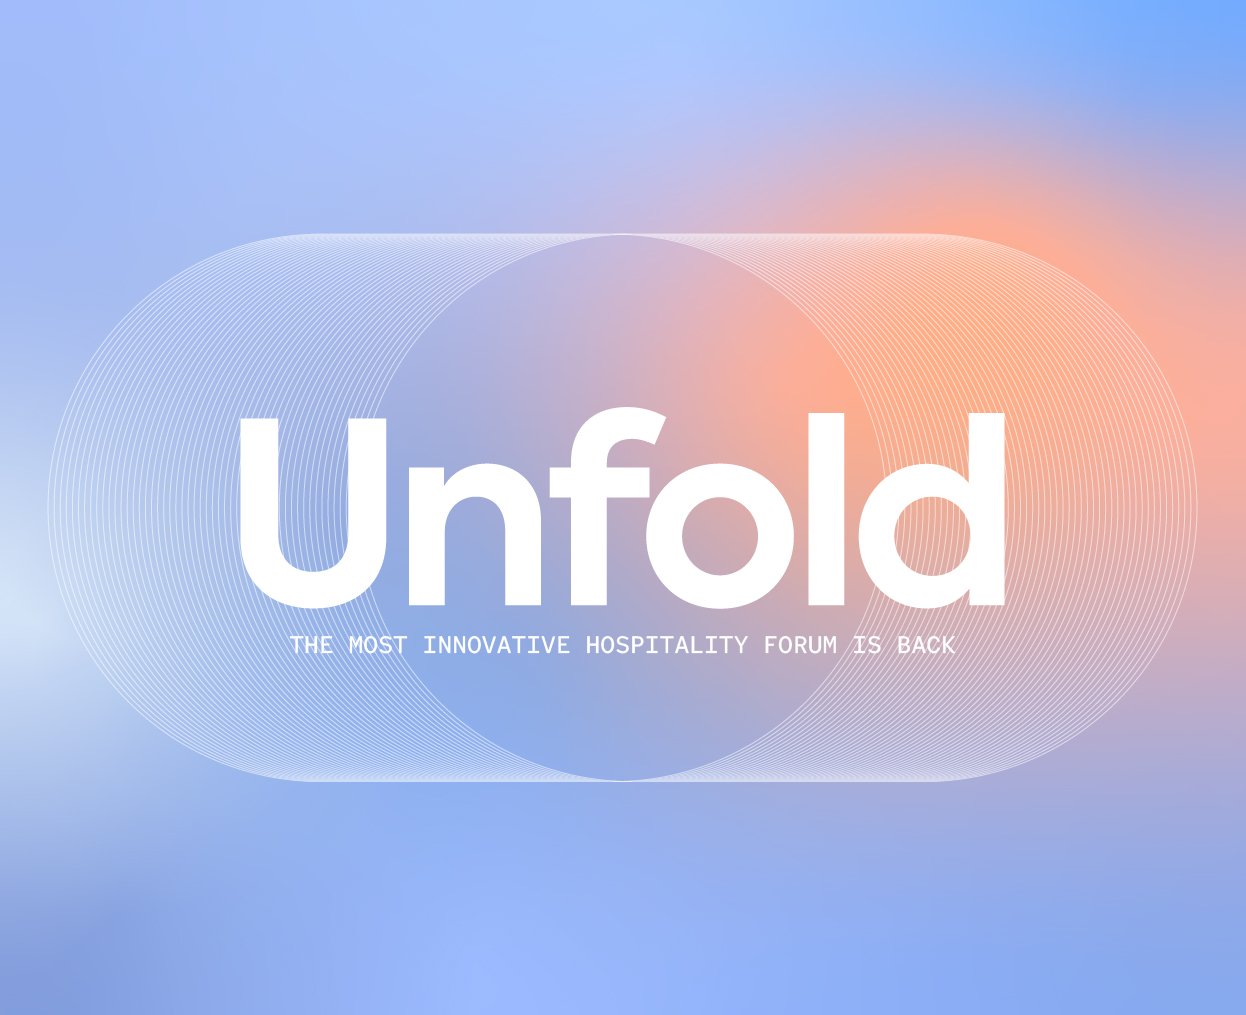 Unfold hospitality forum by Mews